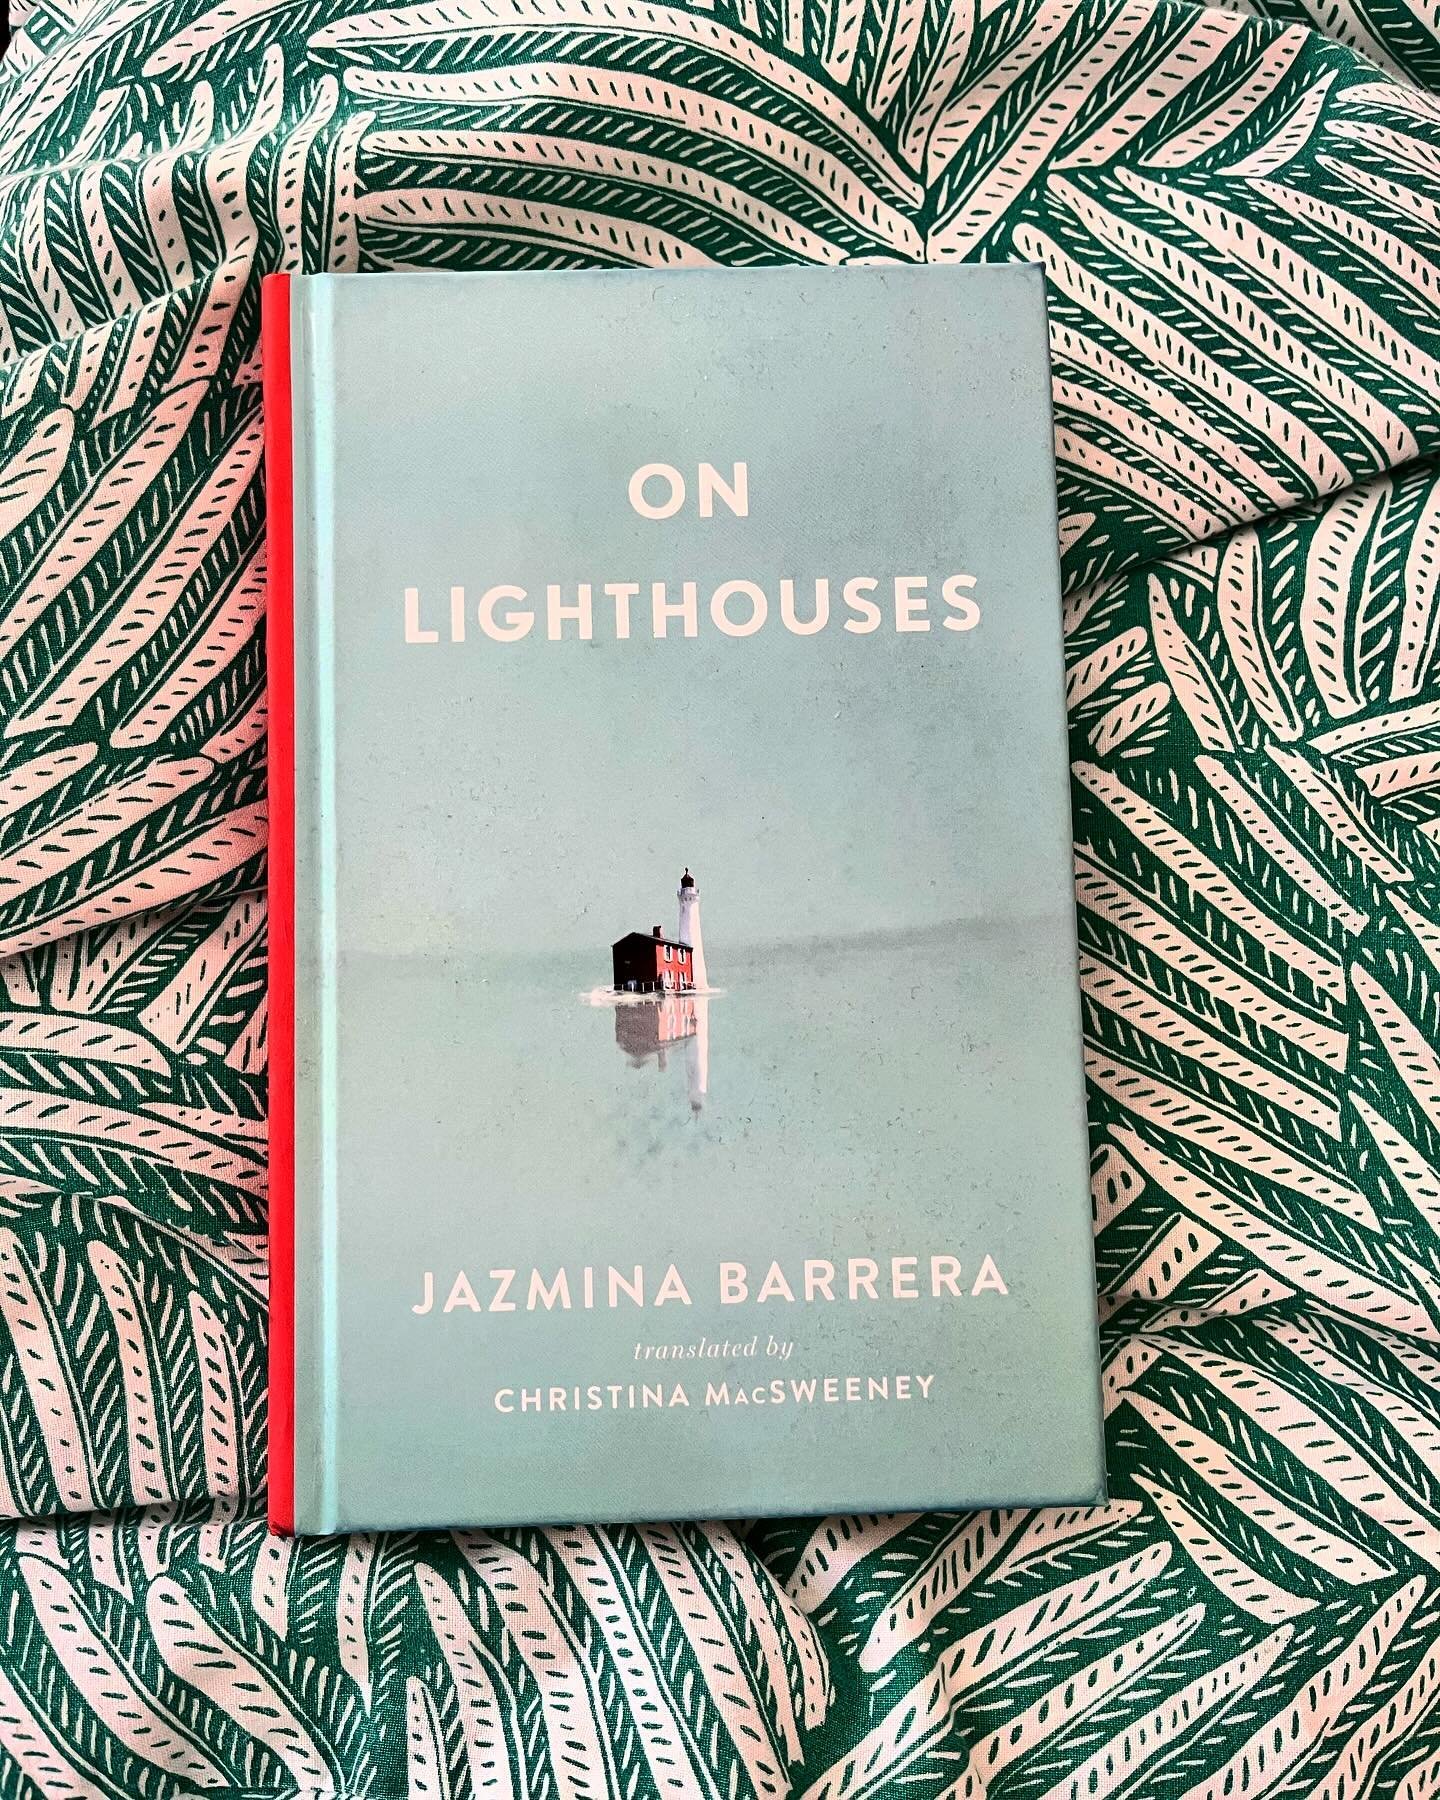 &lsquo;peaceful towers of most benevolent and beneficent hospitality &hellip; Lighthouses speak in that primordial language of flame, and their message is, first and foremost, that human beings are here.&rsquo; Thank you @moscowhitetsb for the unexpe